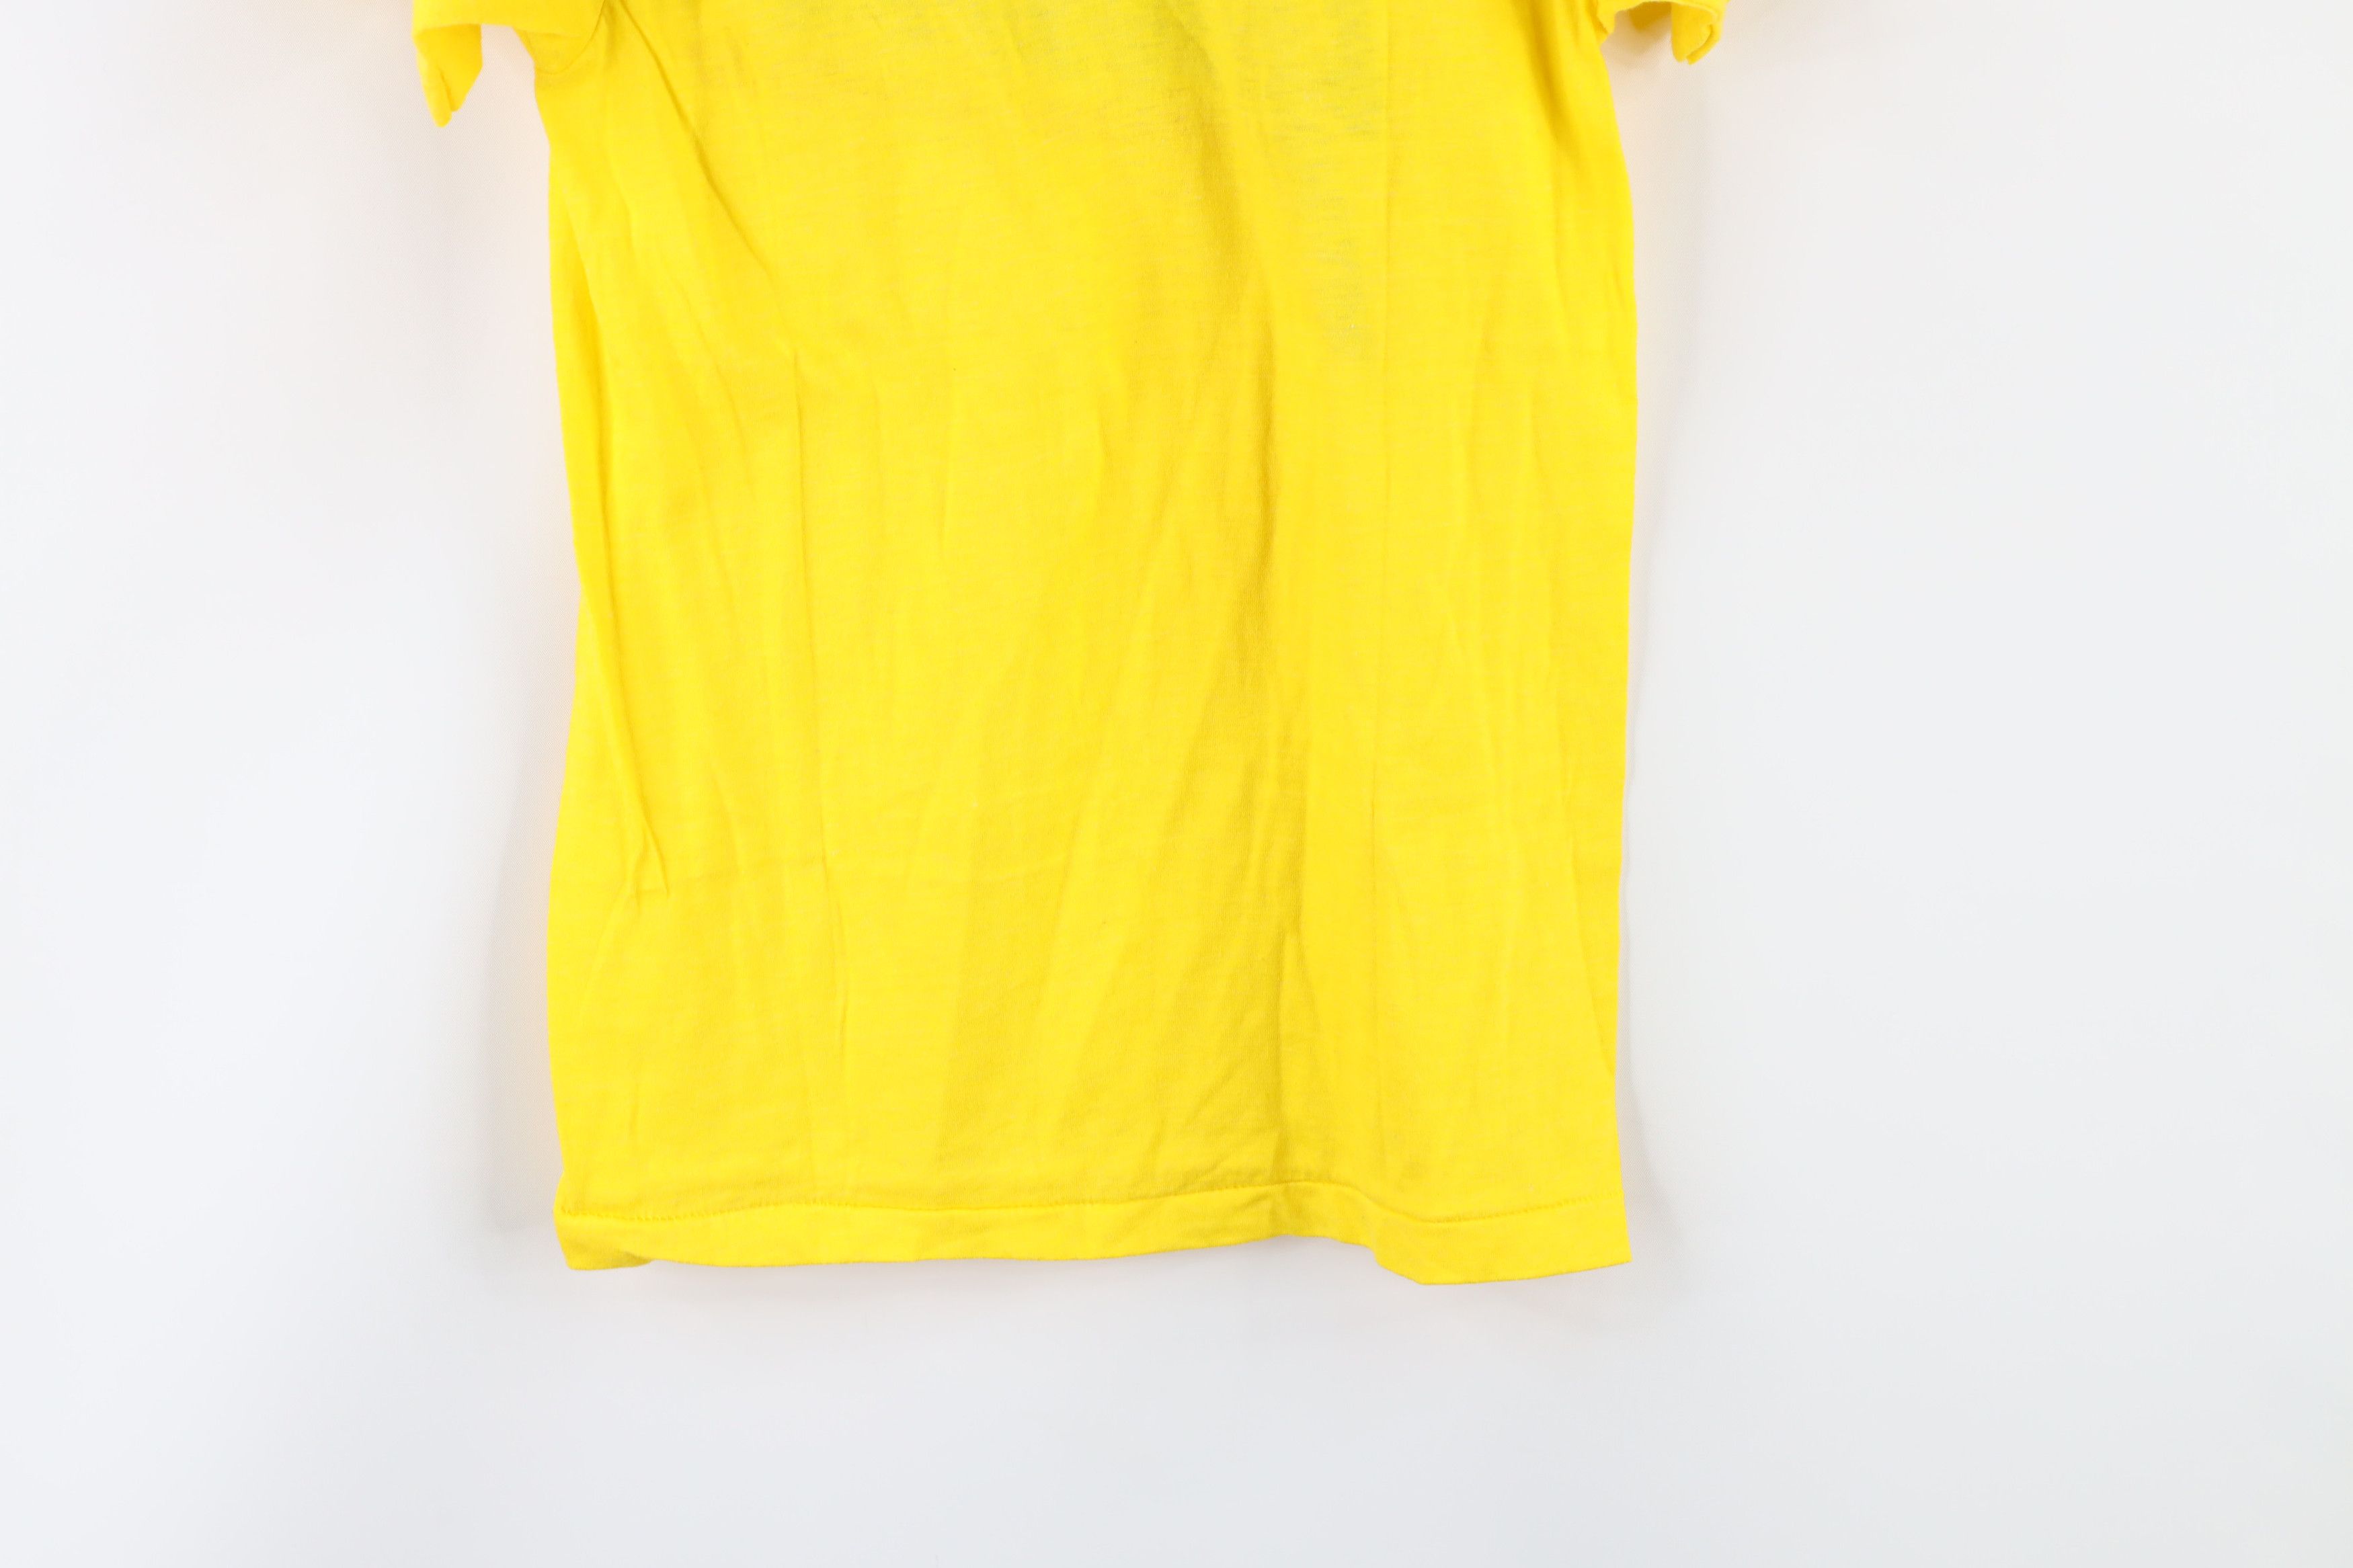 Vintage Vintage 80s YooHoo Chocolate Drink Out T-Shirt Yellow USA Size S / US 4 / IT 40 - 8 Preview